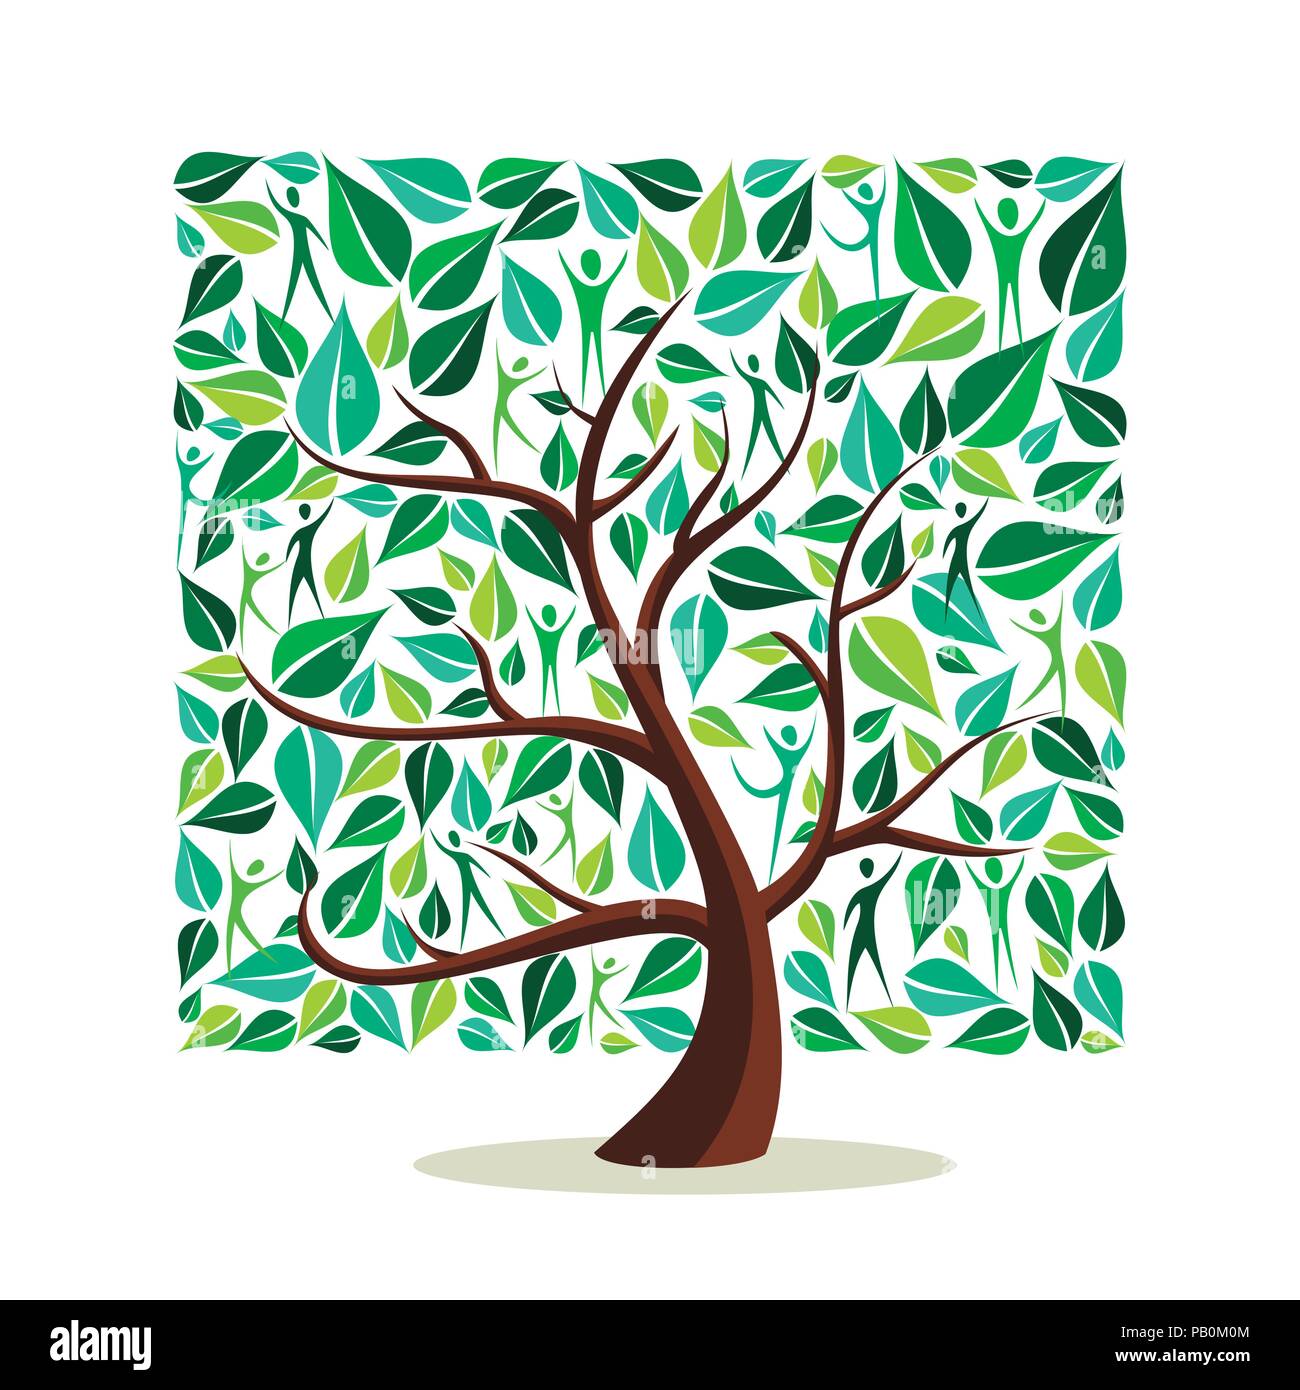 Tree made of green leaves with people in square shape. Nature concept, community help or care campaign. EPS10 vector. Stock Vector